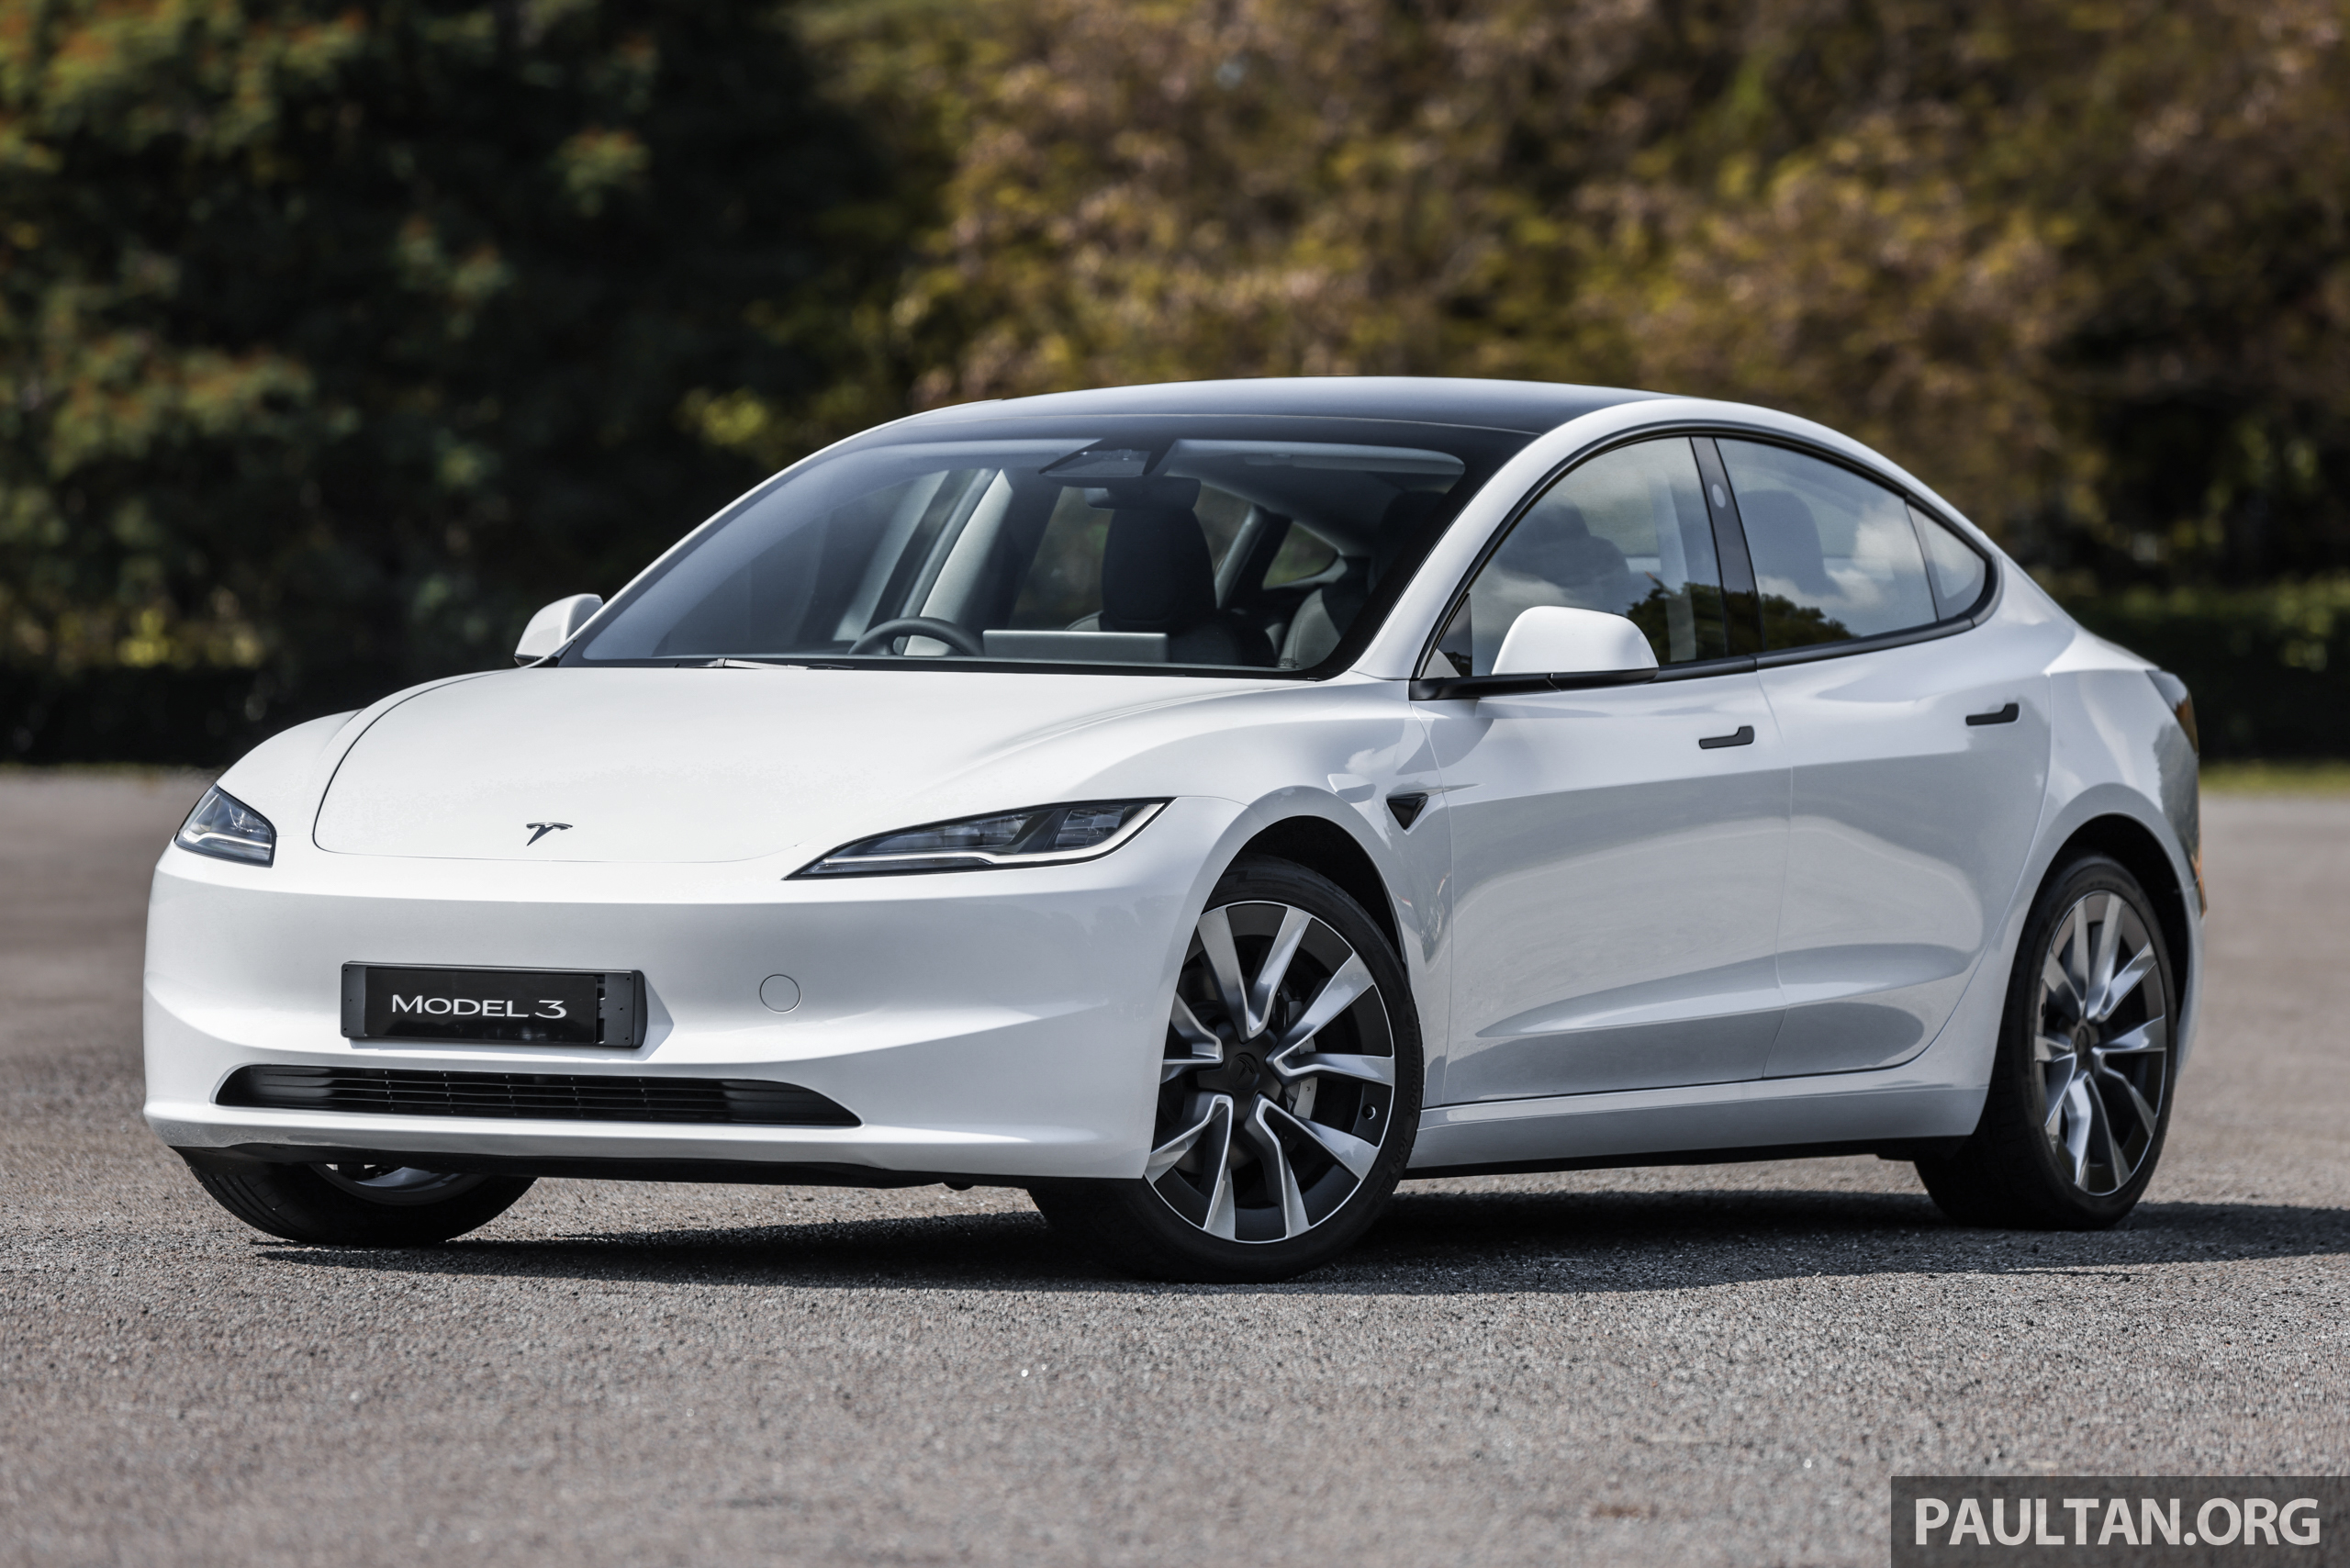 Most Expensive Tesla Model 3 Highland Costs $64,000 - CarsDirect